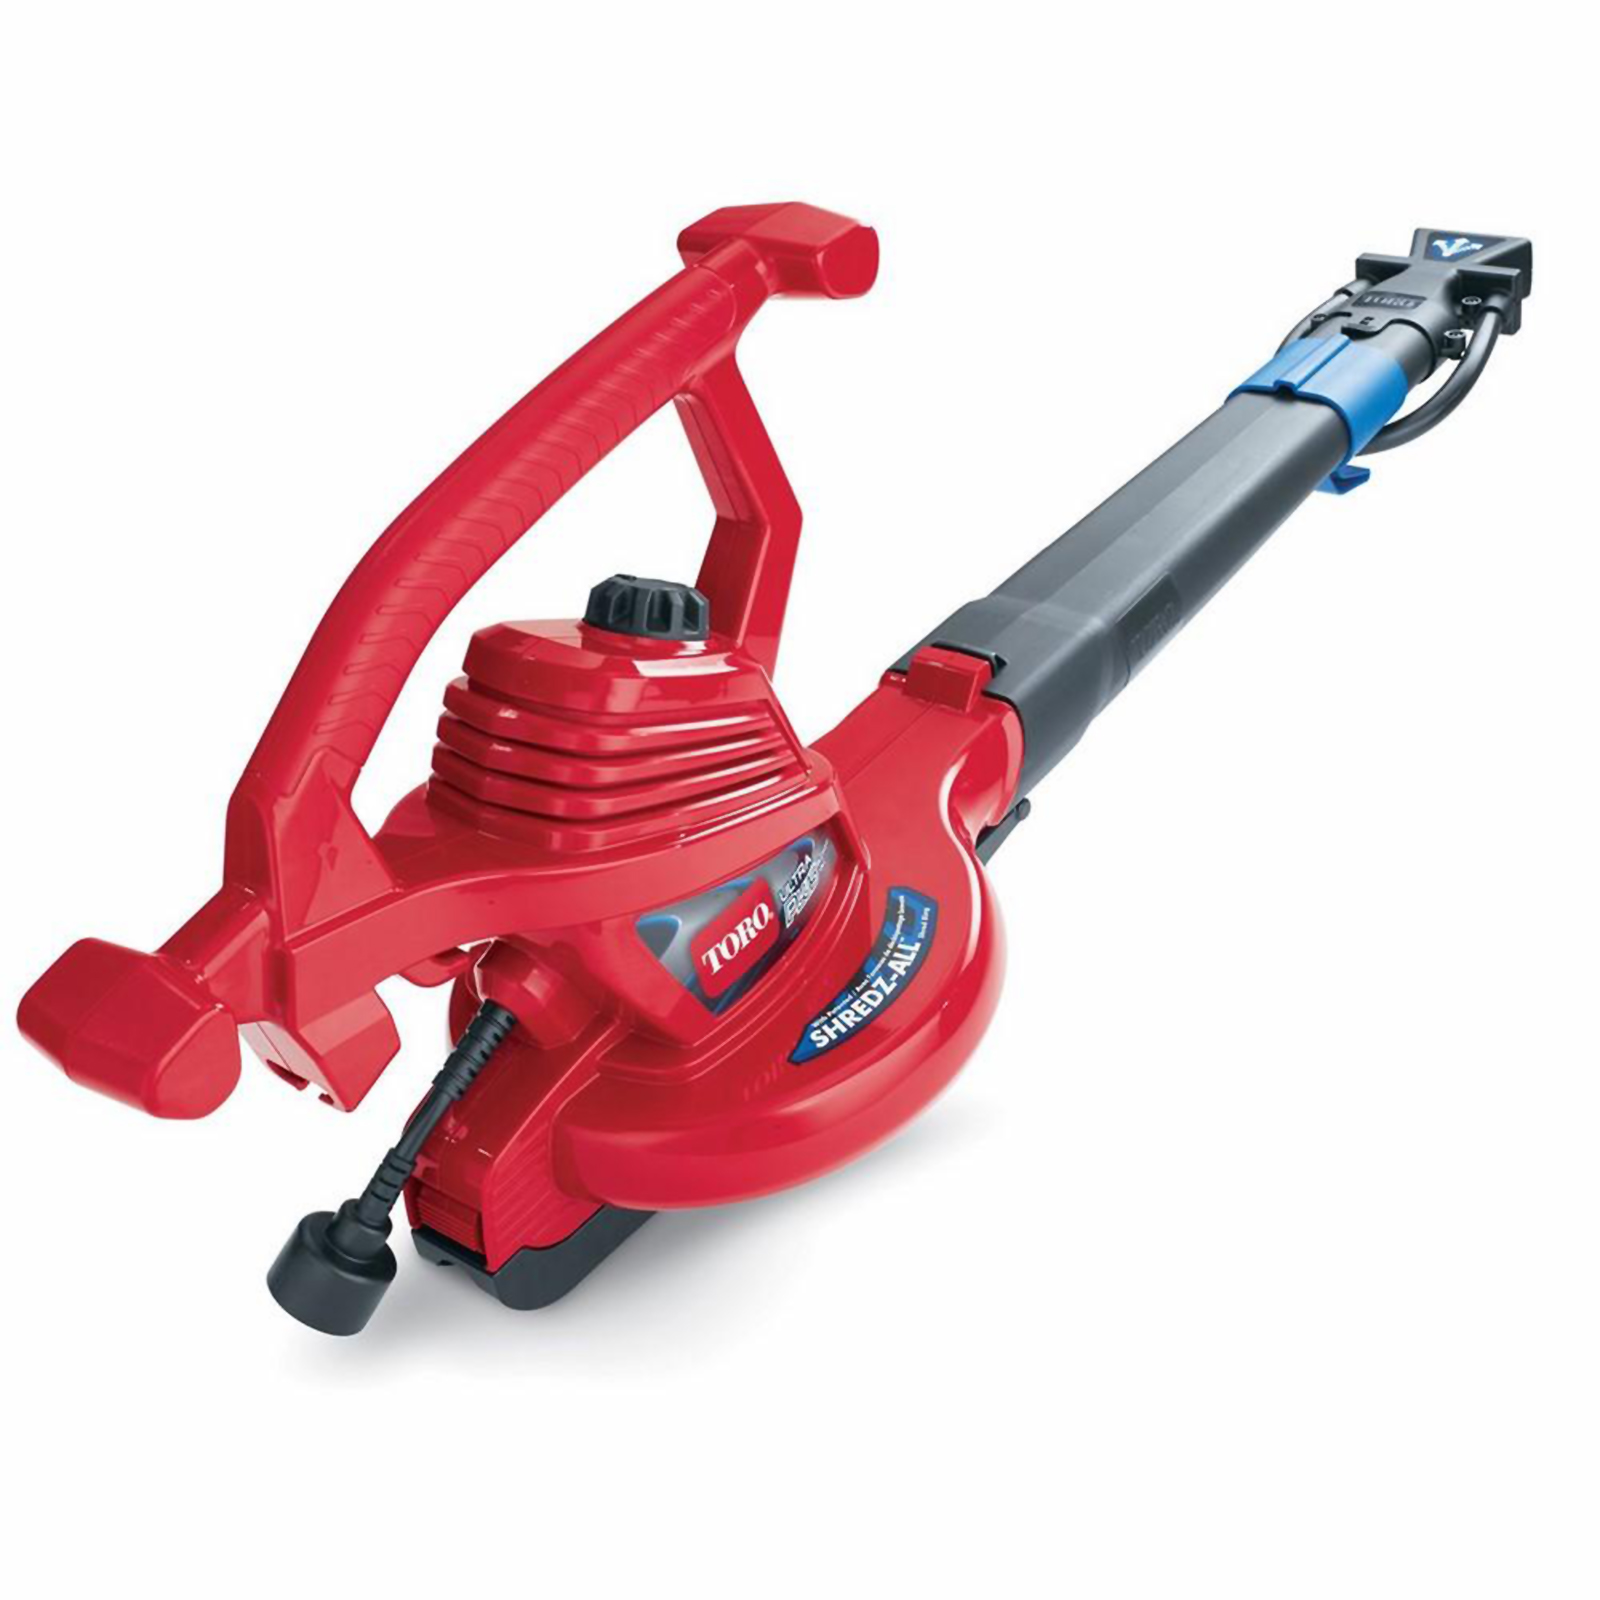 Photo 1 of ****UNABLE TO TEST**** Toro The Toro Company Toro UltraPlus Leaf Blower Vacuum, Variable-Speed (up to 250 mph) with Metal Impeller, 12 amp